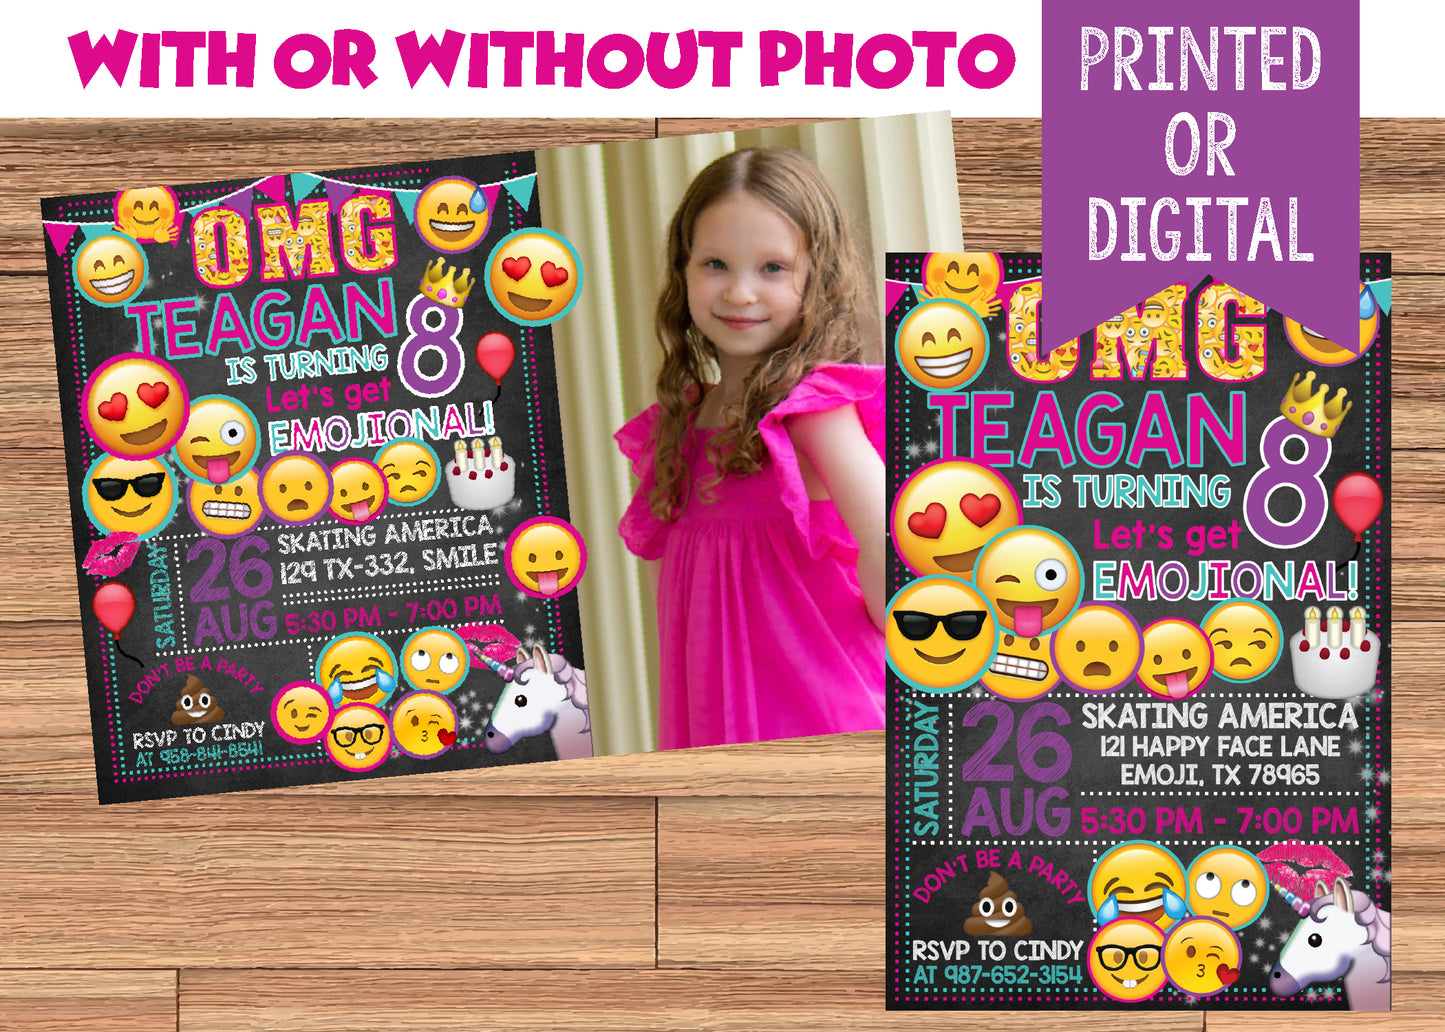 EMOJI Fun Birthday Party Invitation With or Without Photo! Printed or Digital!